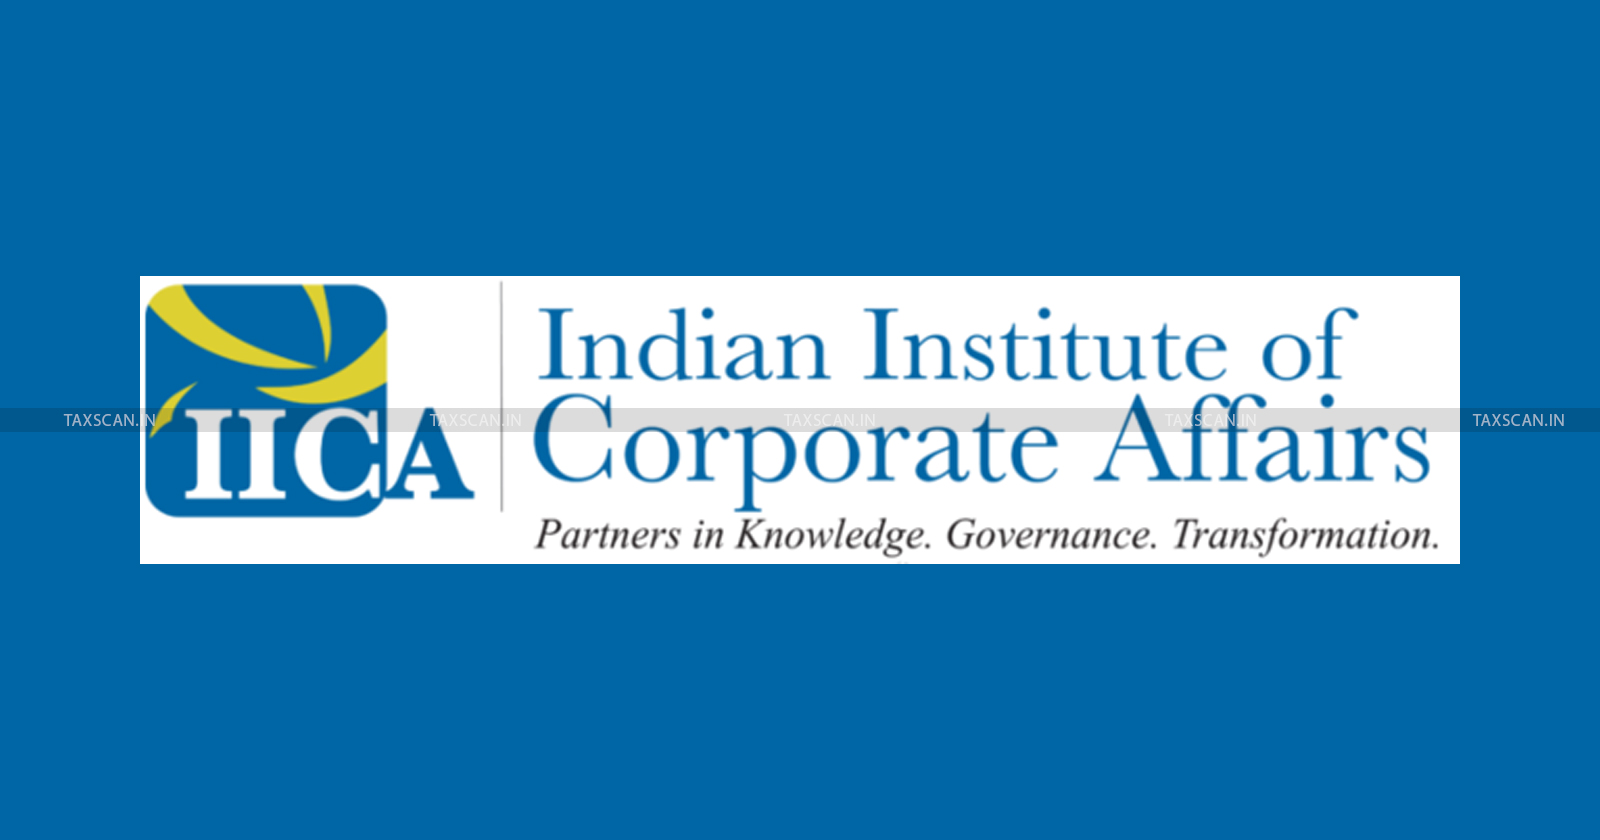 Disclosures by Businesses in India - Businesses in India - Disclosures - Non-Financial Disclosures - Tax News - Business Responsibility and Sustainability Reporting - BRSR - TAXSCAN